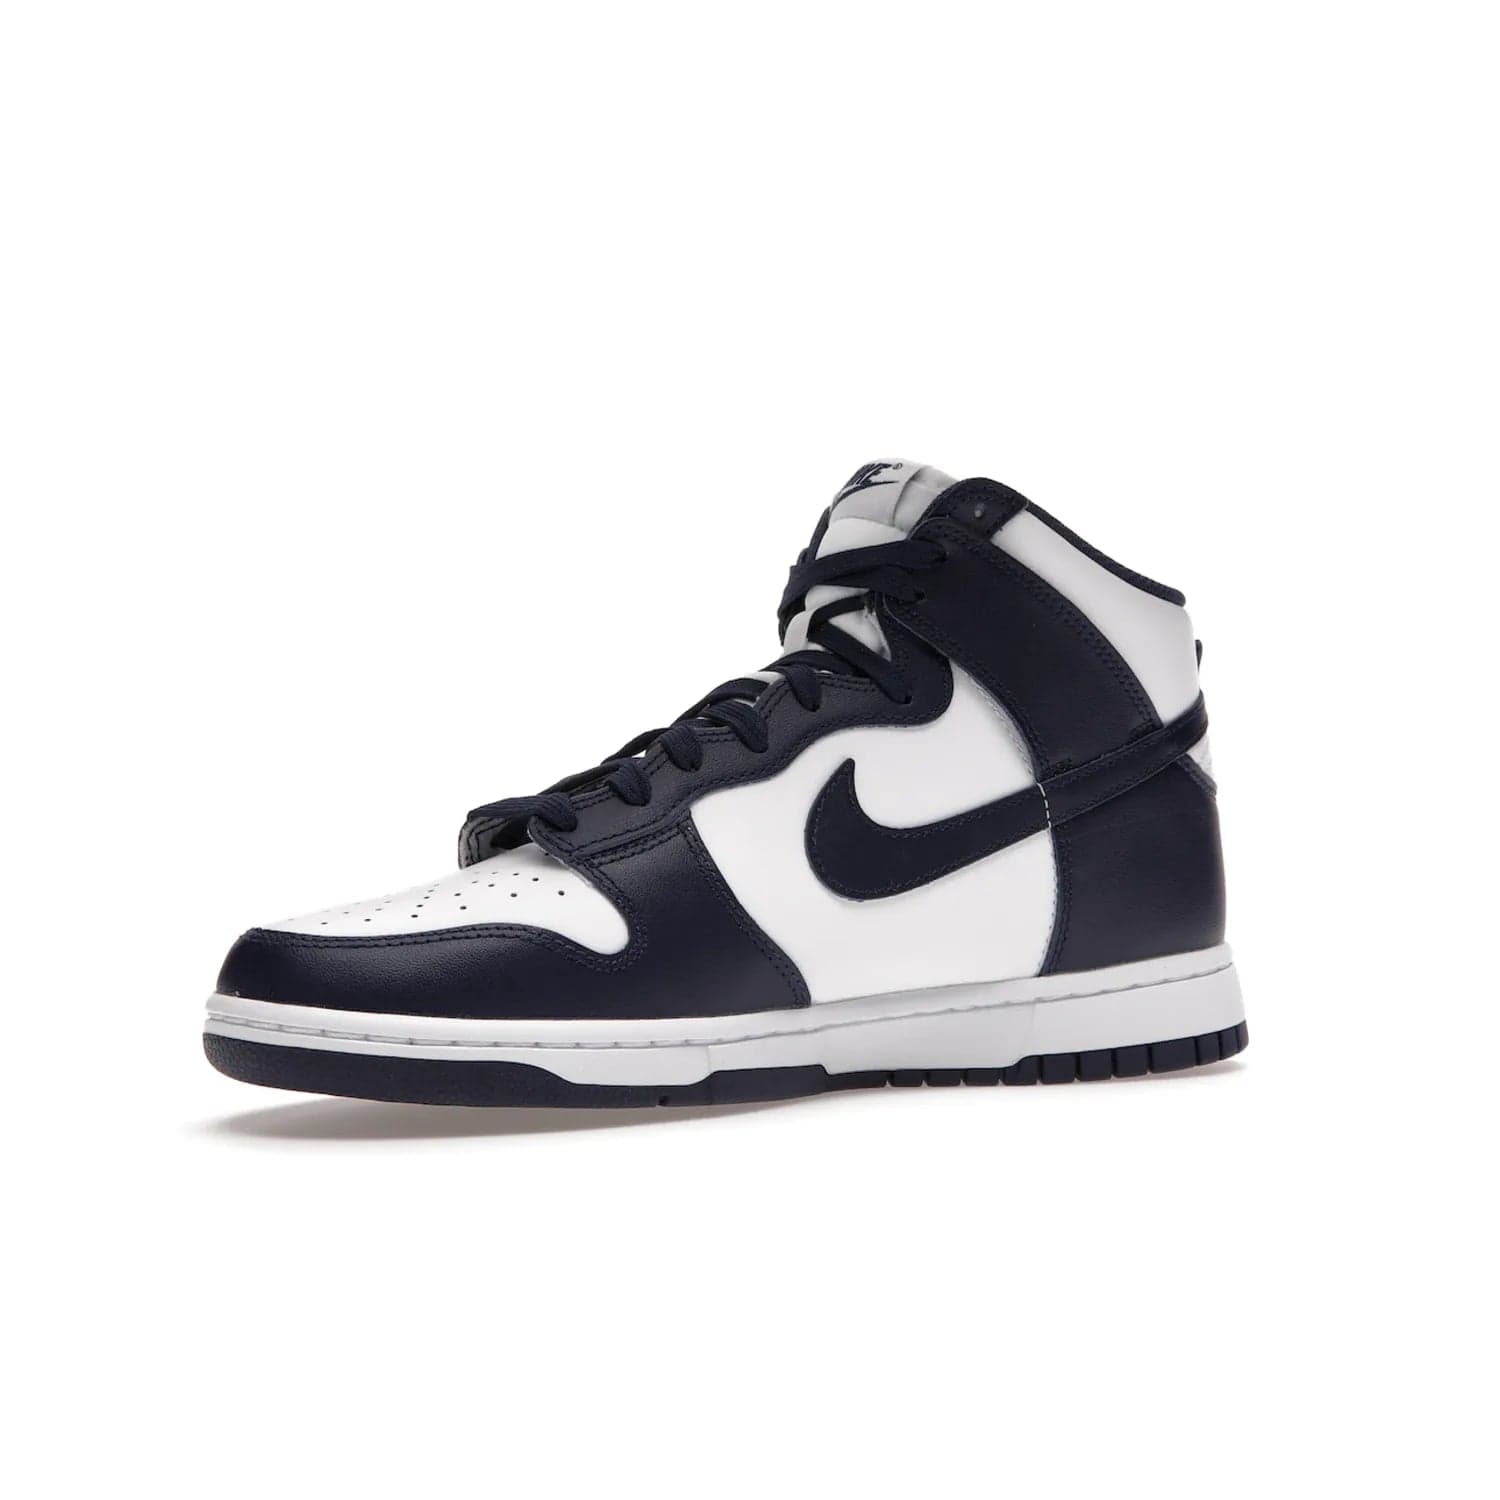 Nike Dunk High Championship Navy - Image 16 - Only at www.BallersClubKickz.com - Classic Nike Dunk High sneaker delivers an unforgettable style with white leather upper, Championship Navy overlays, and matching woven tongue label and sole. Make a statement with the Championship Navy today.